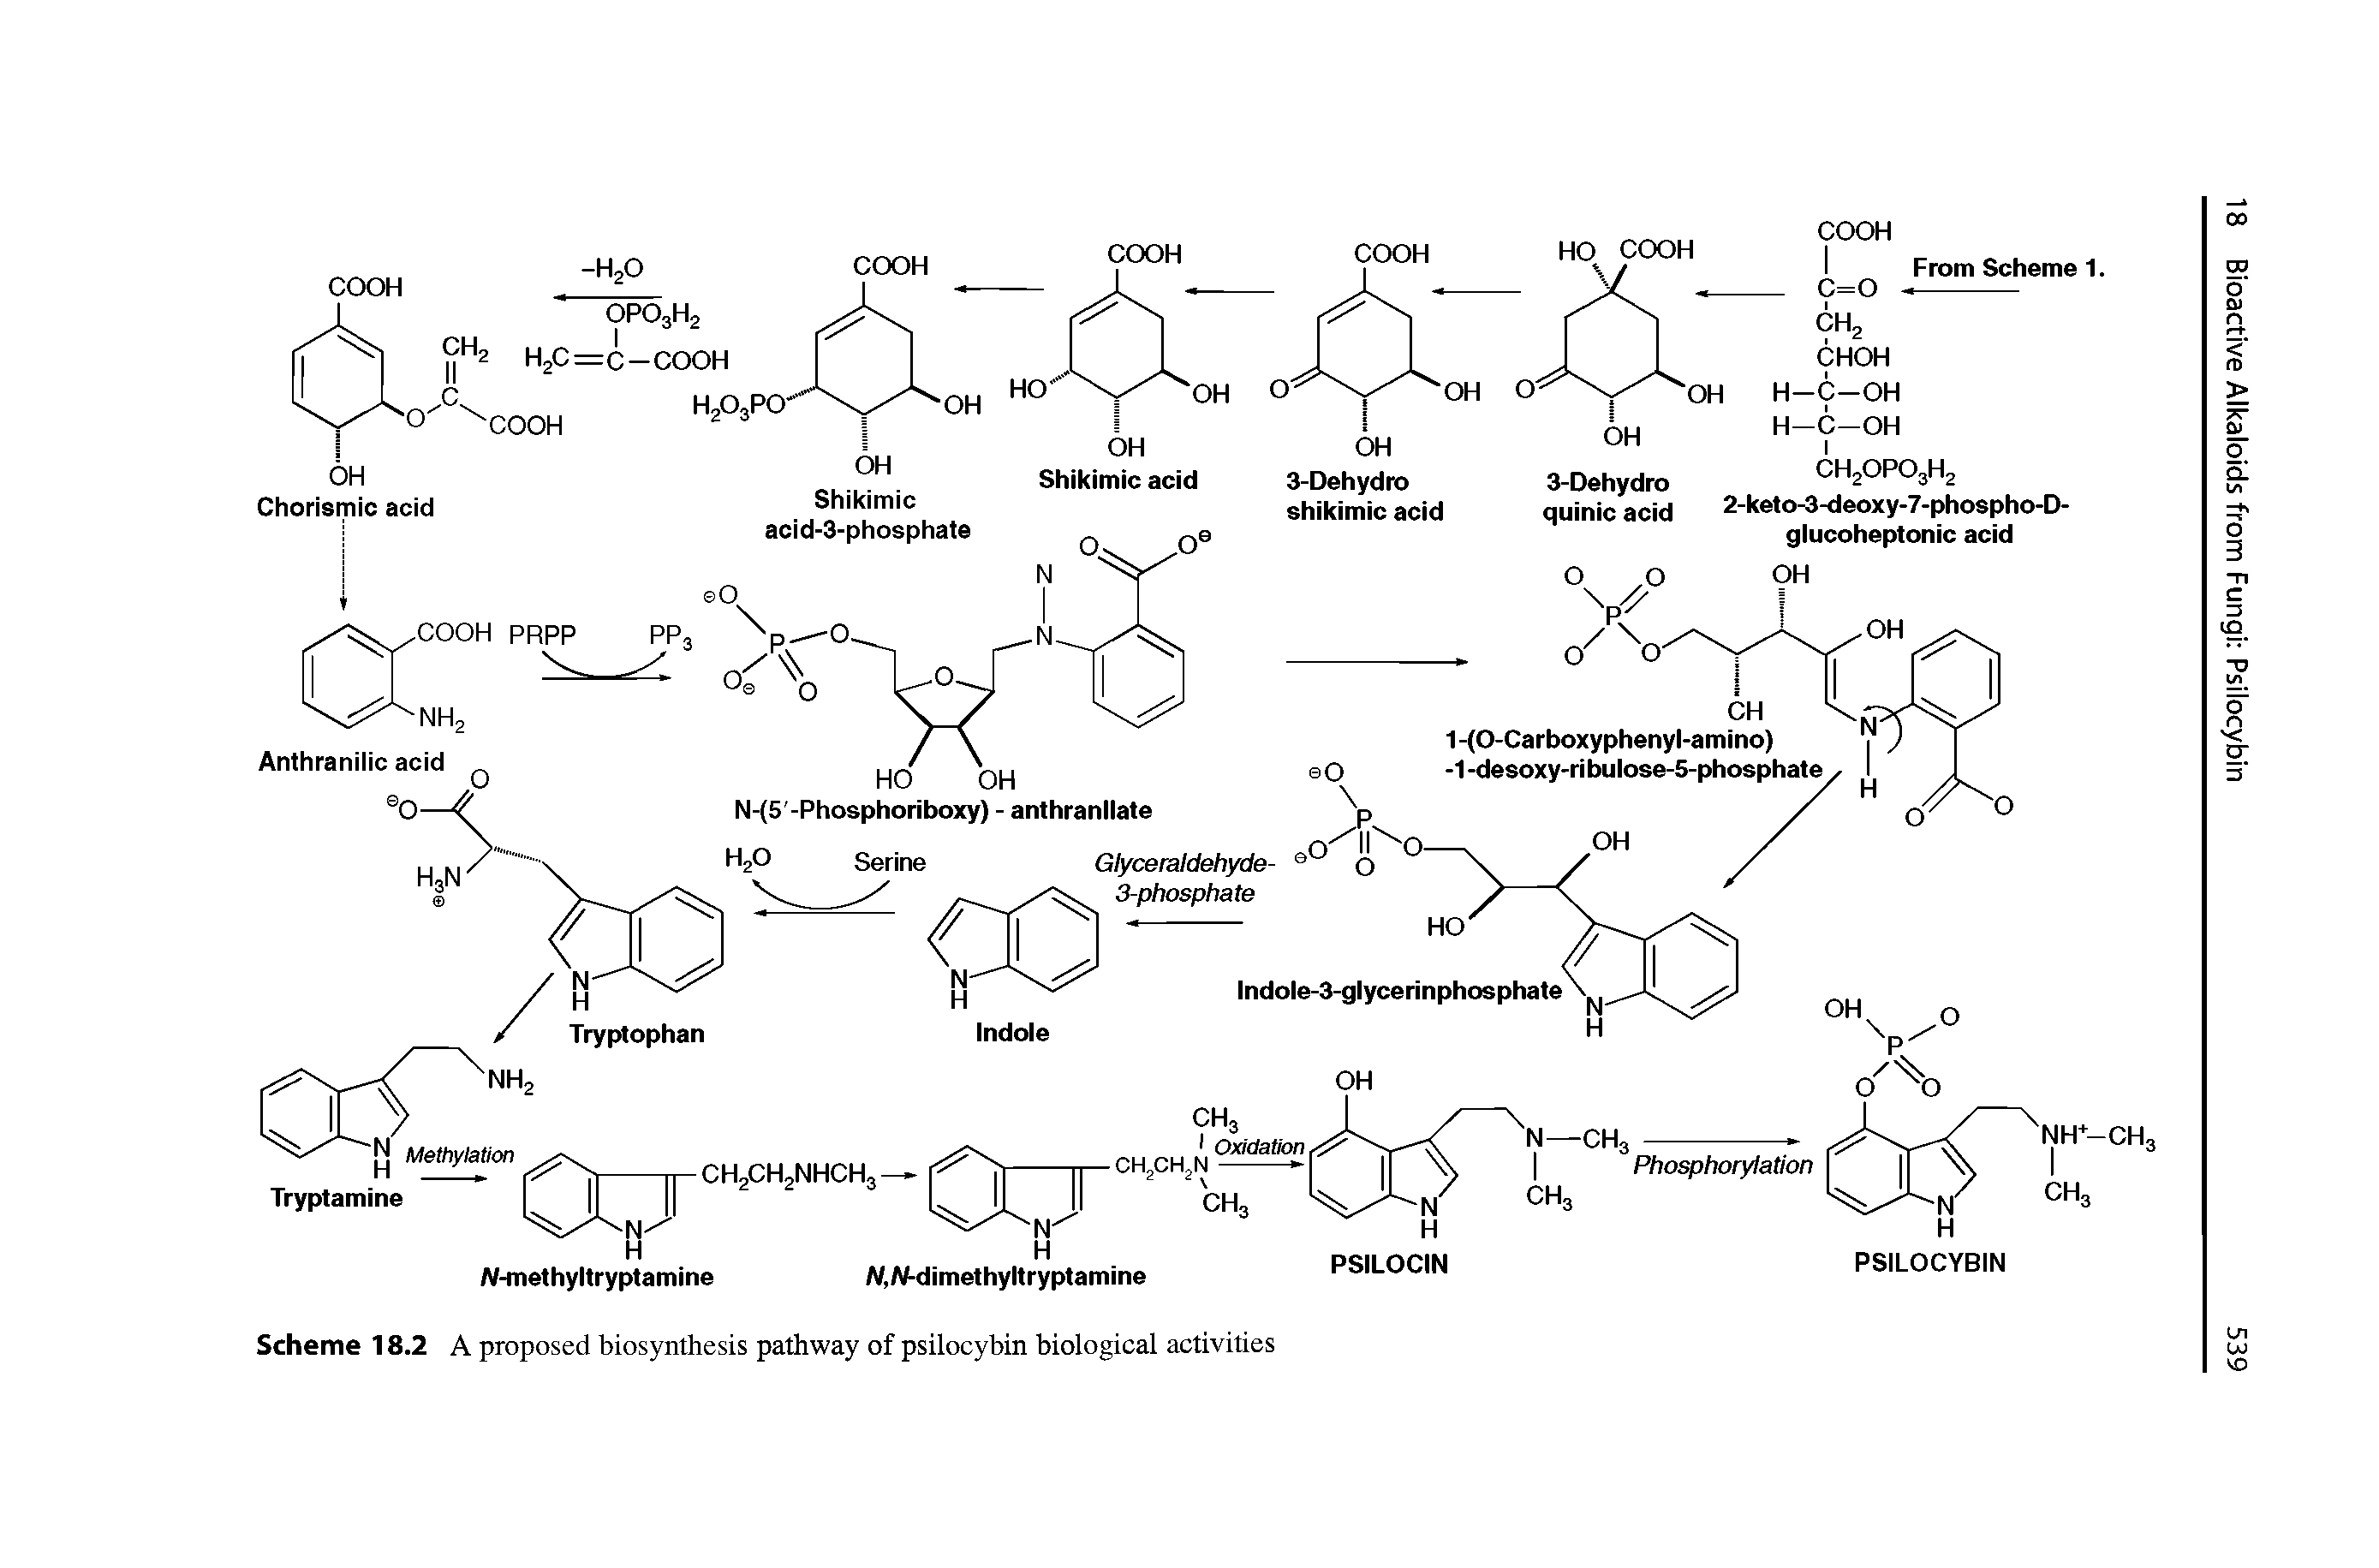 Scheme 18.2 A proposed biosynthesis pathway of psilocybin biological activities...